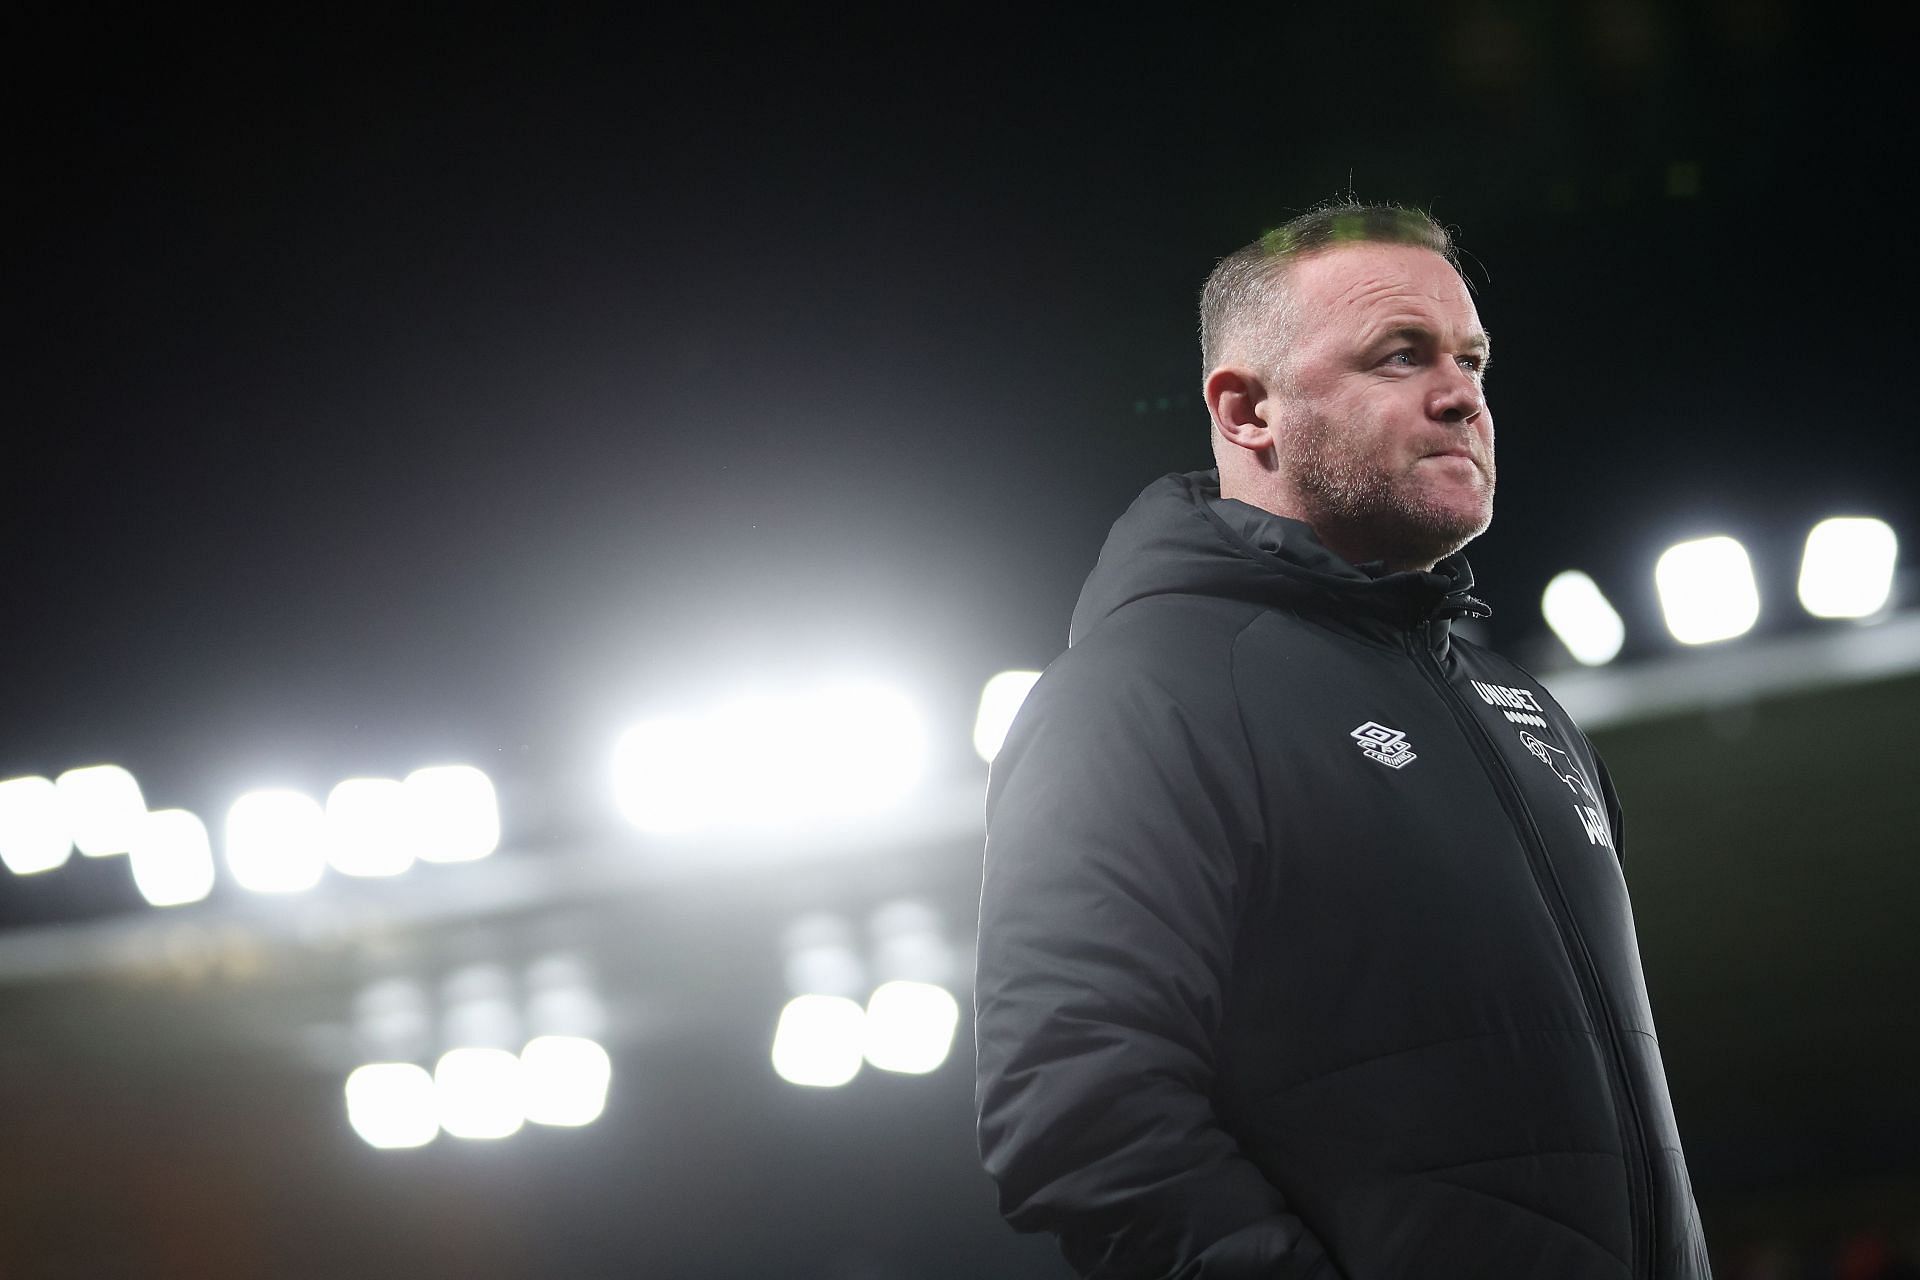 Wayne Rooney, the manager of Derby County can only hope his club does not go into administration